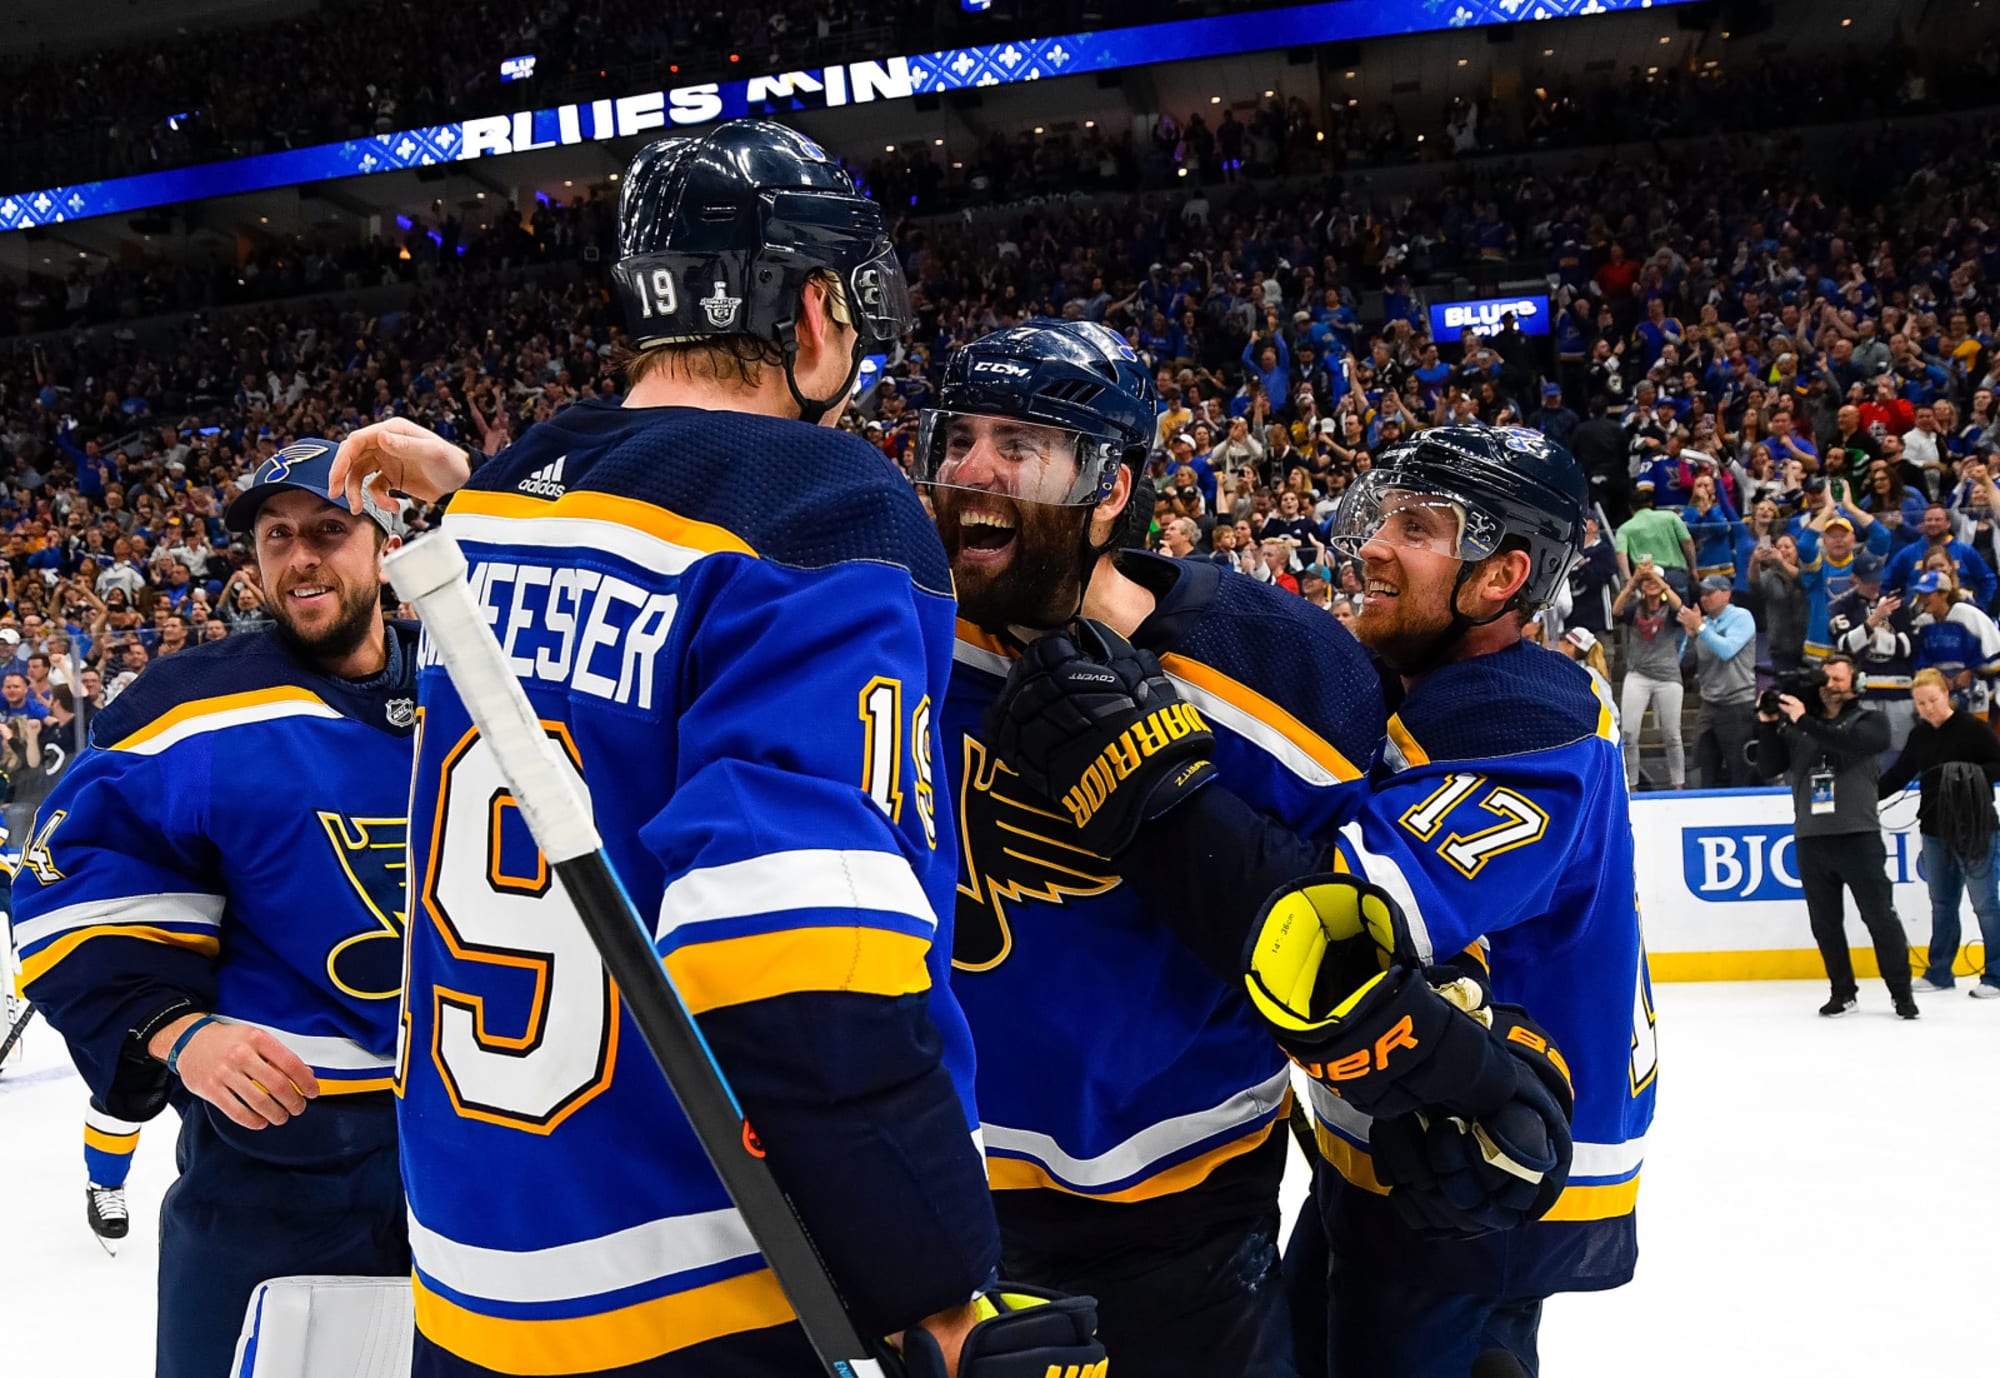 St. Louis Blues on X: Good luck this season to our friends at the